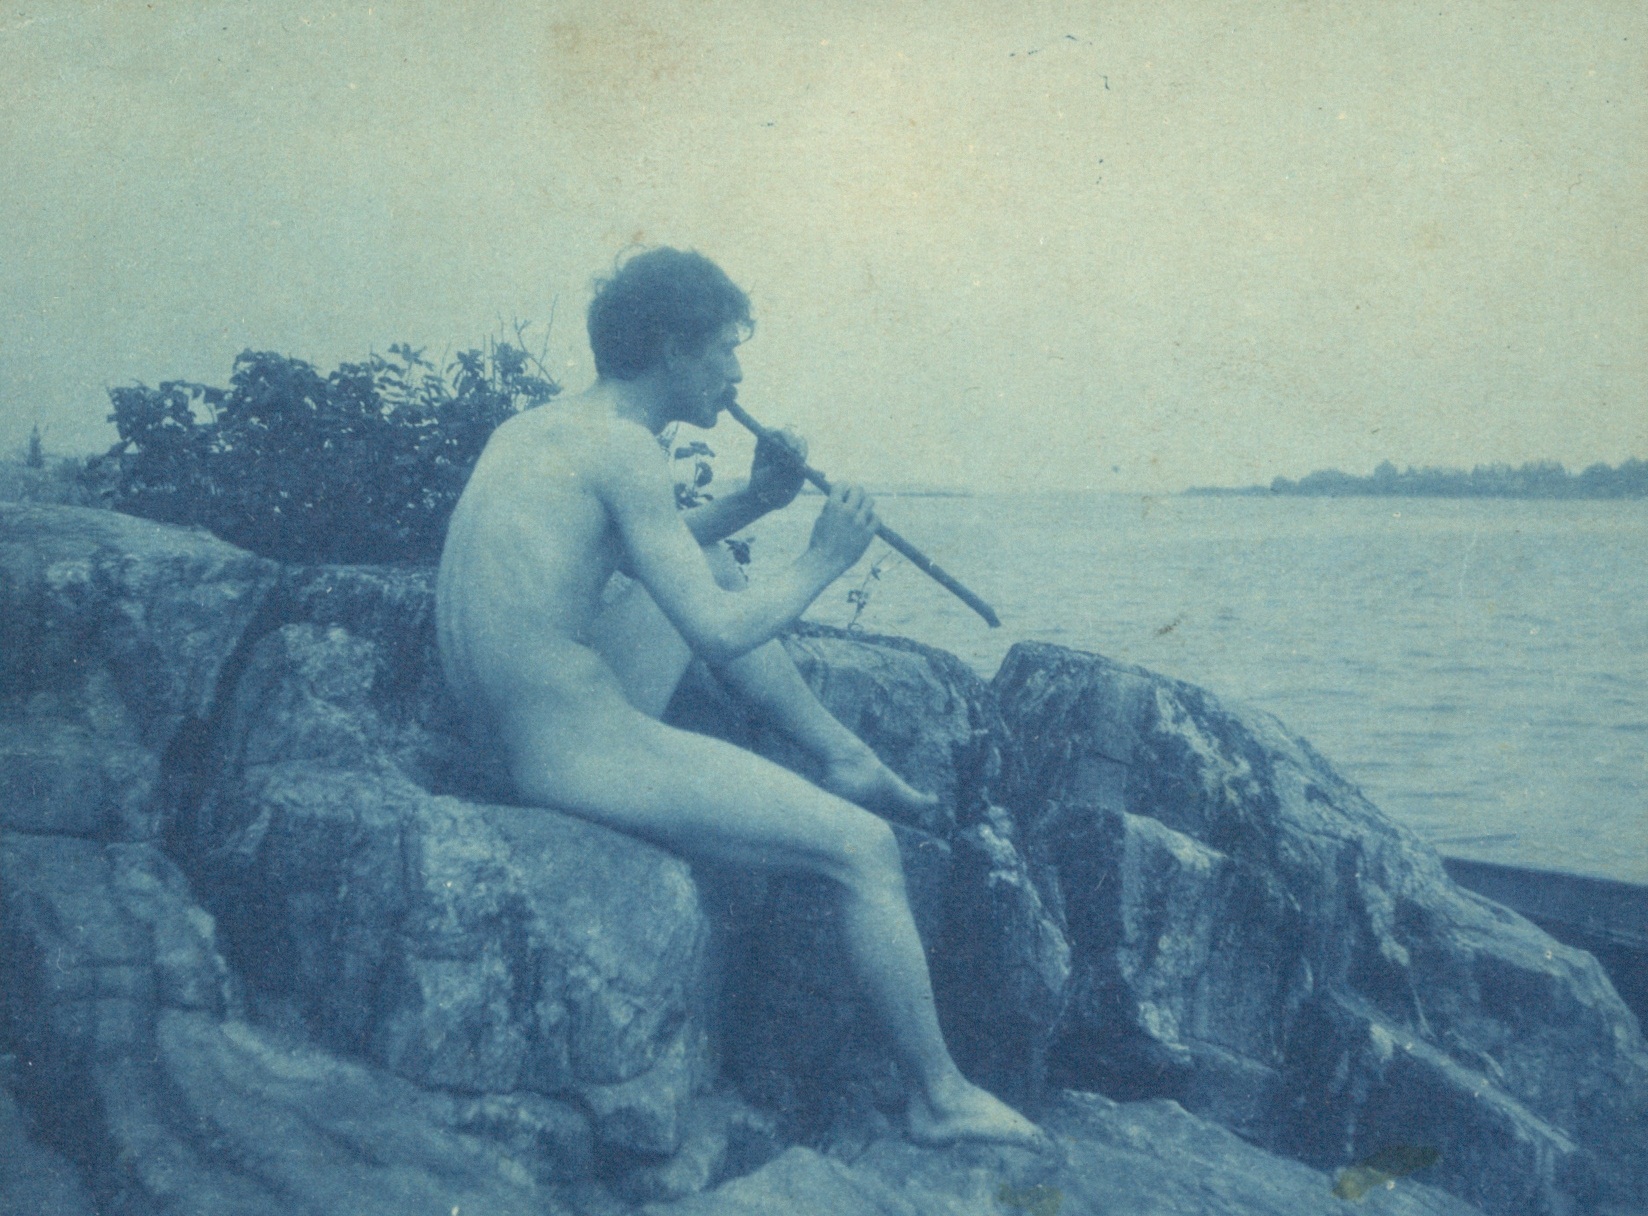 Cyanotype photographh of a nude man playing pipe by Frances Benjamin Johnston